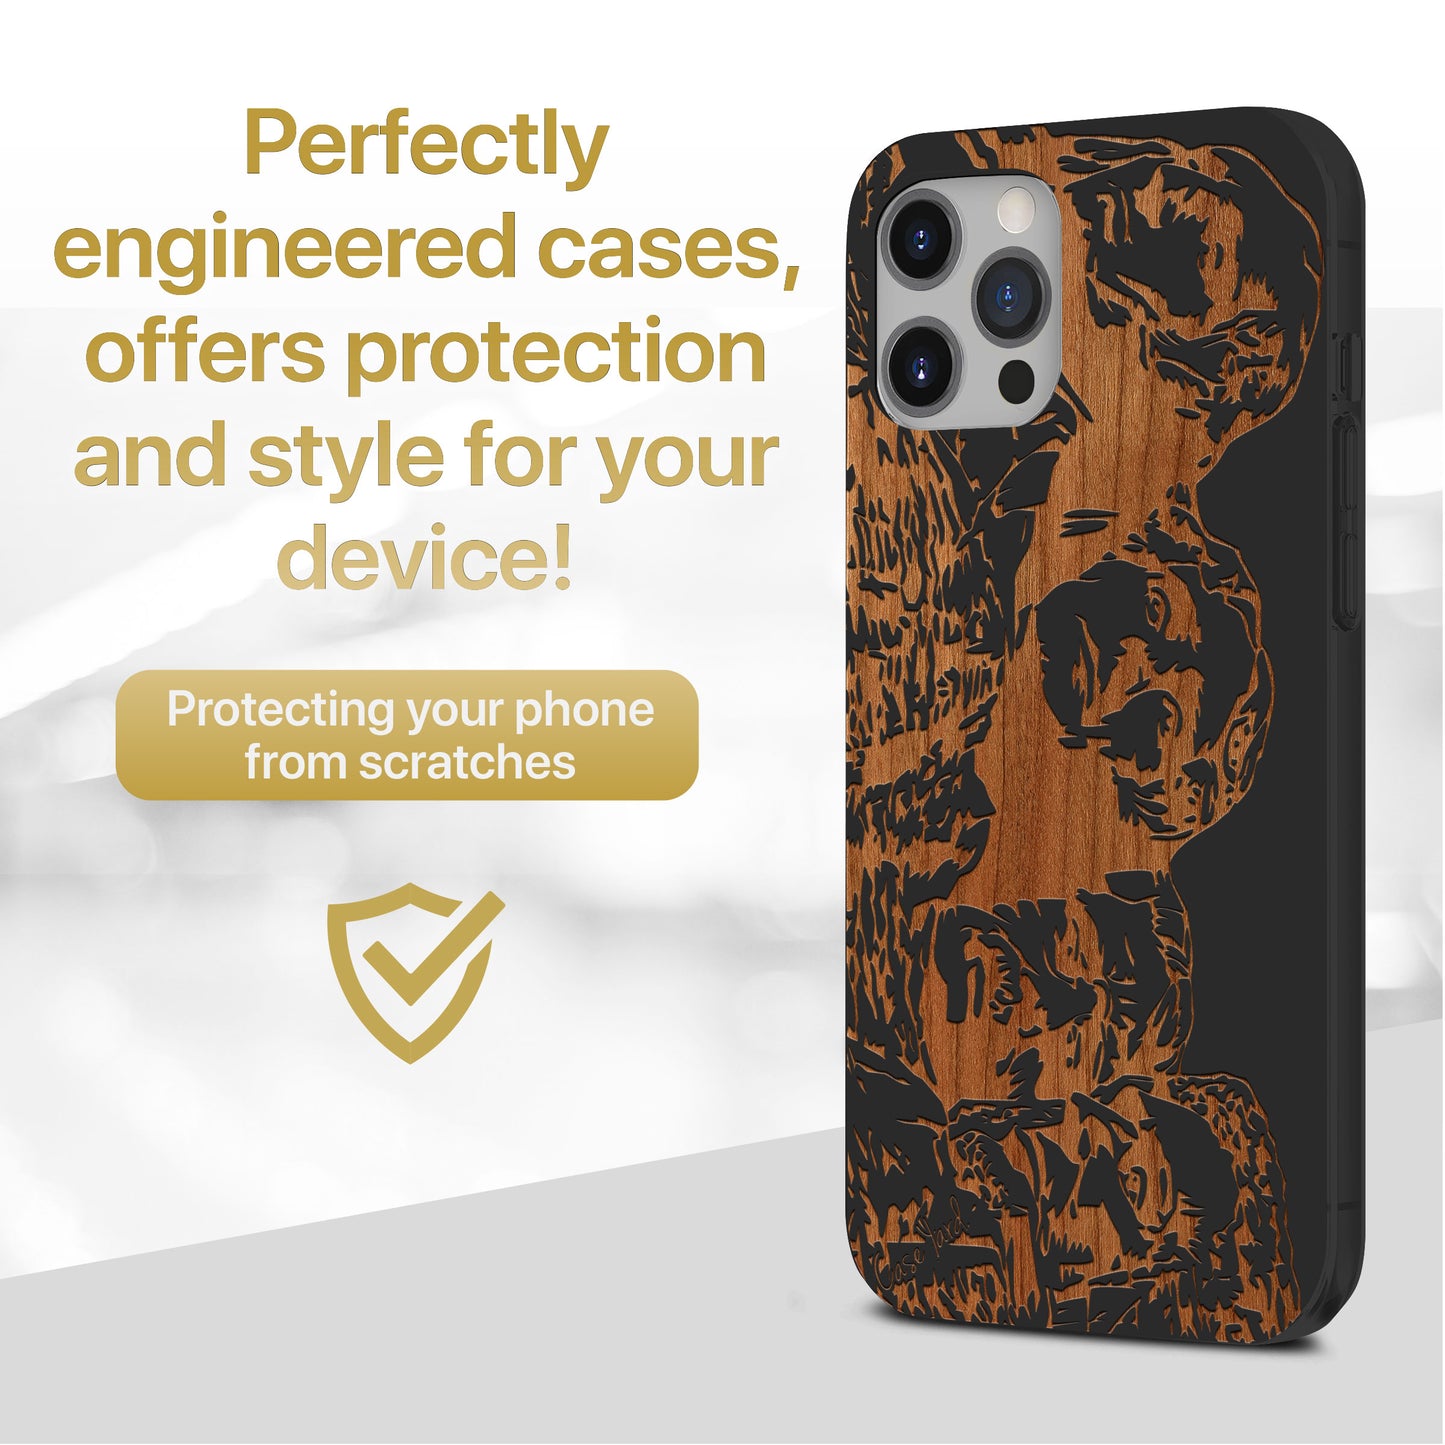 Wooden Cell Phone Case Cover, Laser Engraved case for iPhone & Samsung phone Mount Rushmore Design